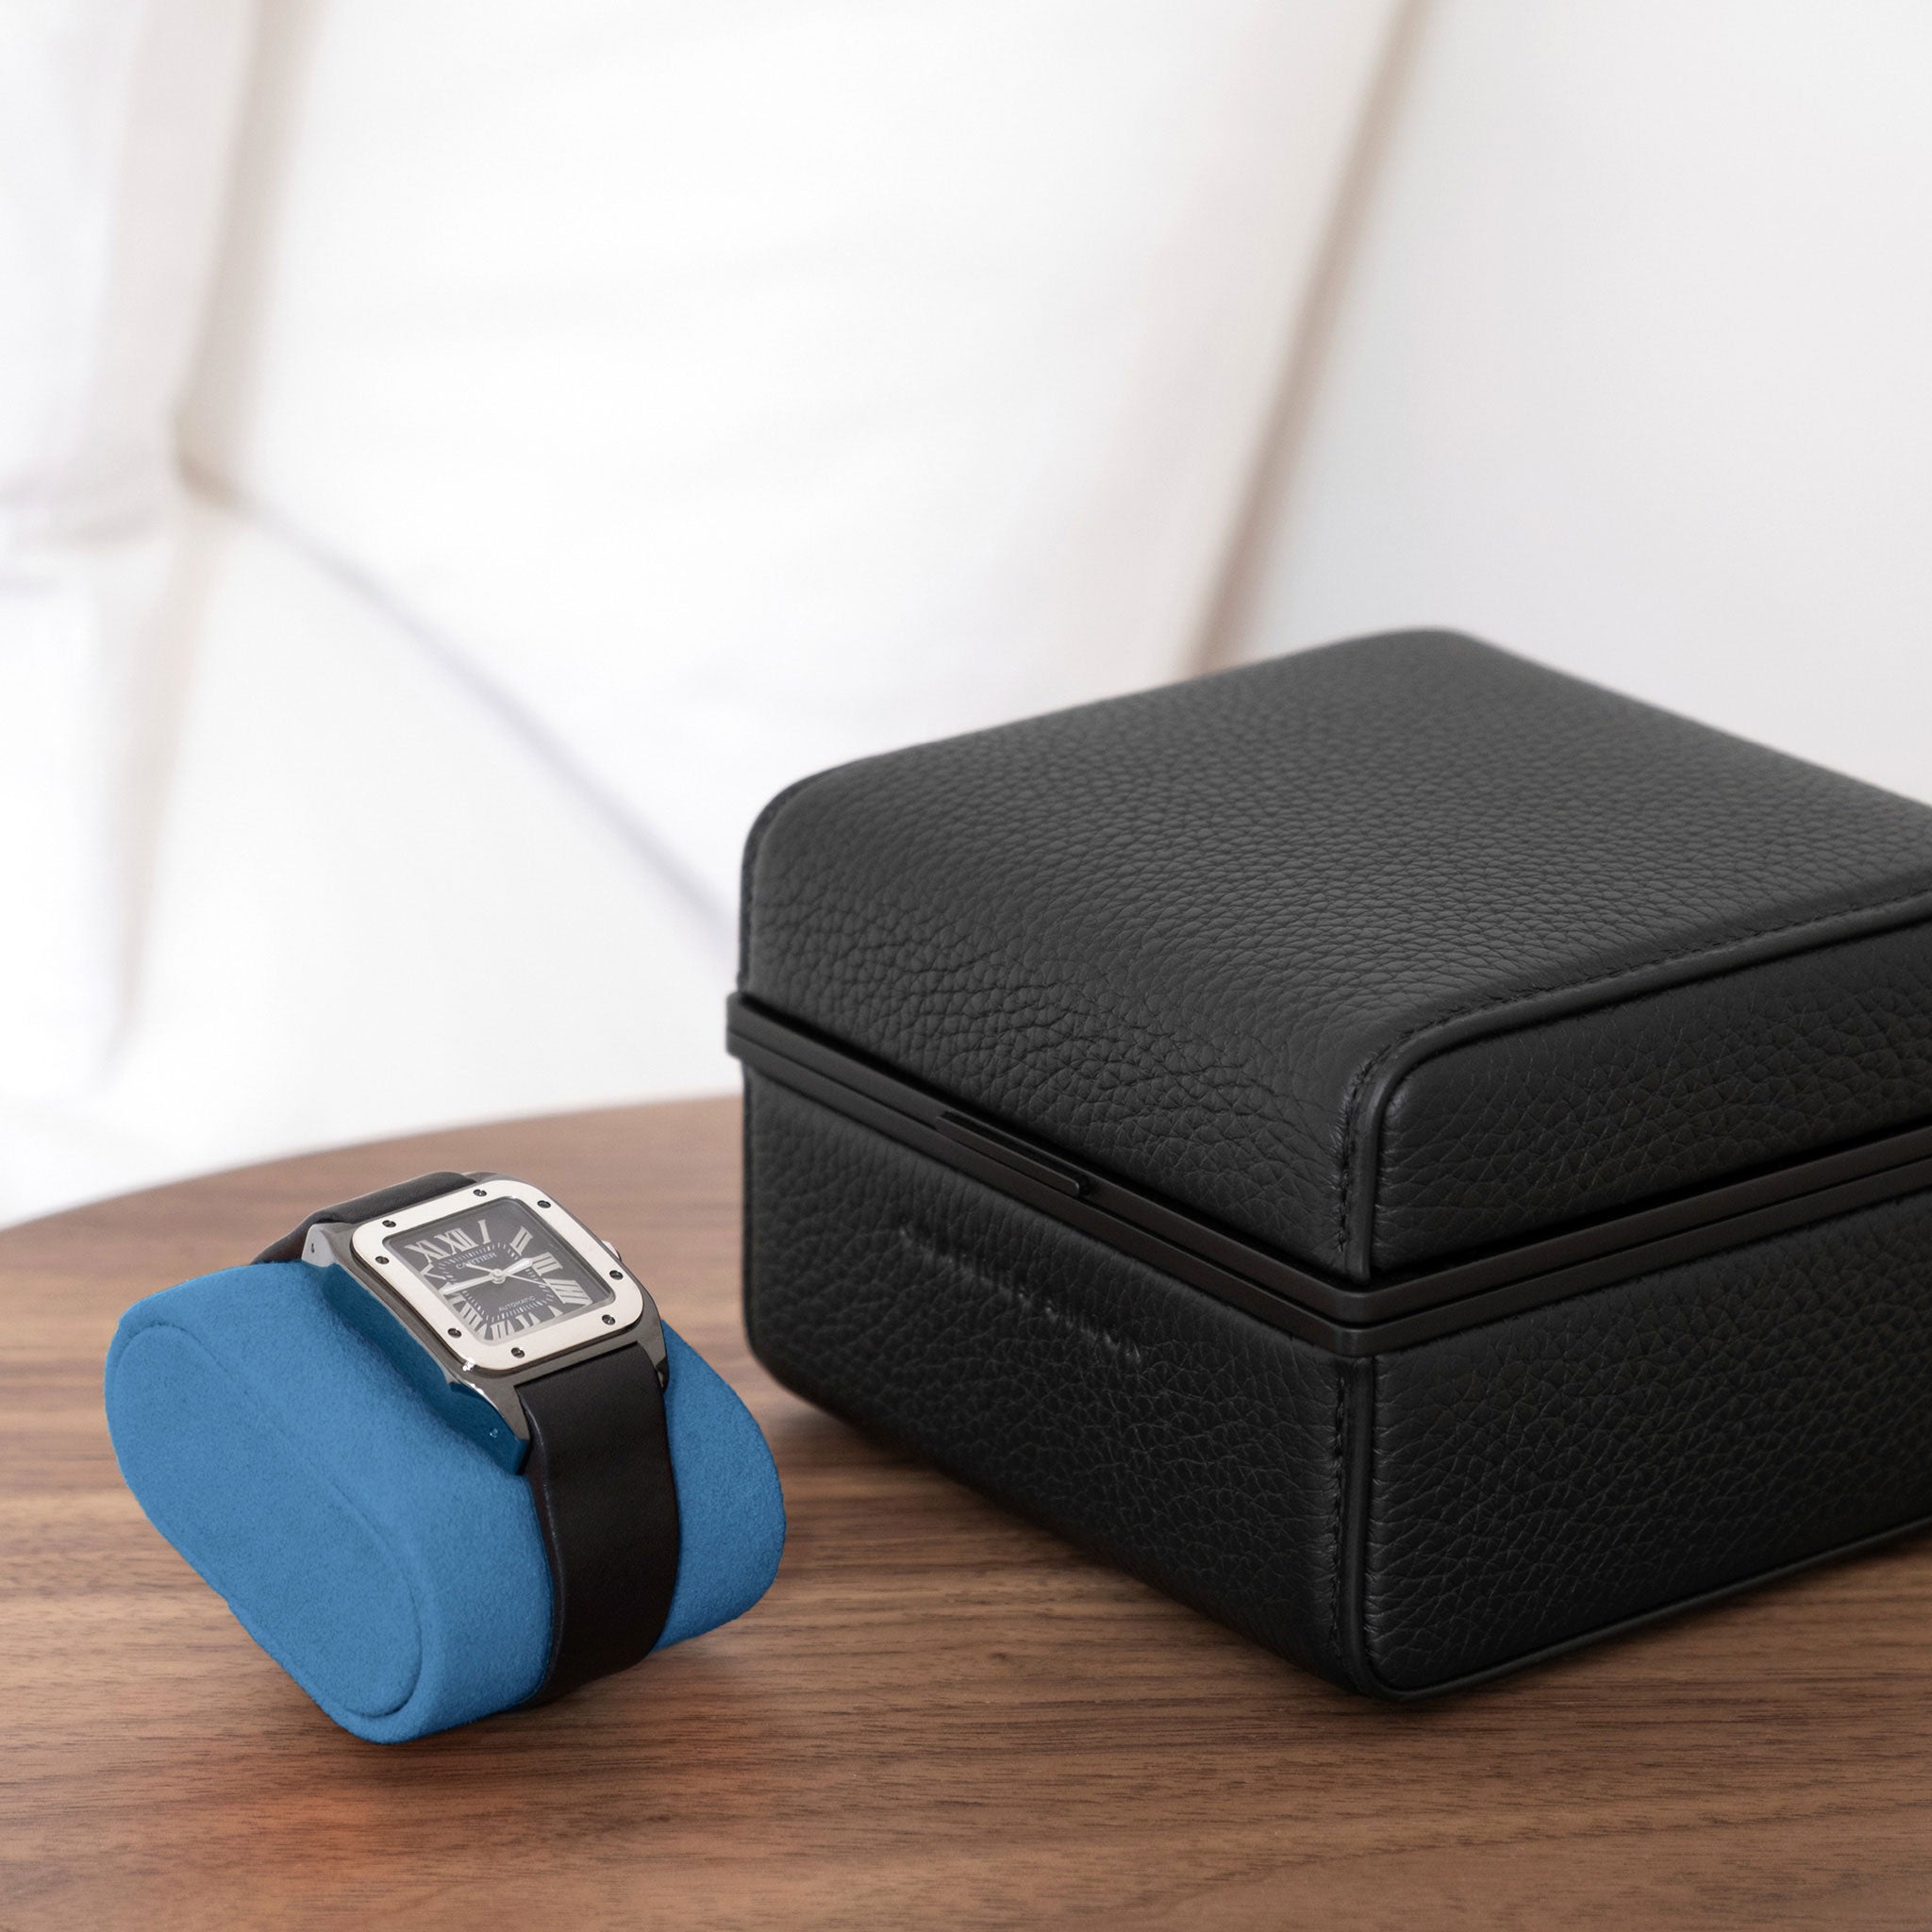 Lifestyle photo of all black Eaton 1 Watch case with contrasting cyan blue interior sitting closed on minimalist table. Cartier Santos luxury watch is placed on cyan blue removable Alcantara cushion next to closed luxury watch case